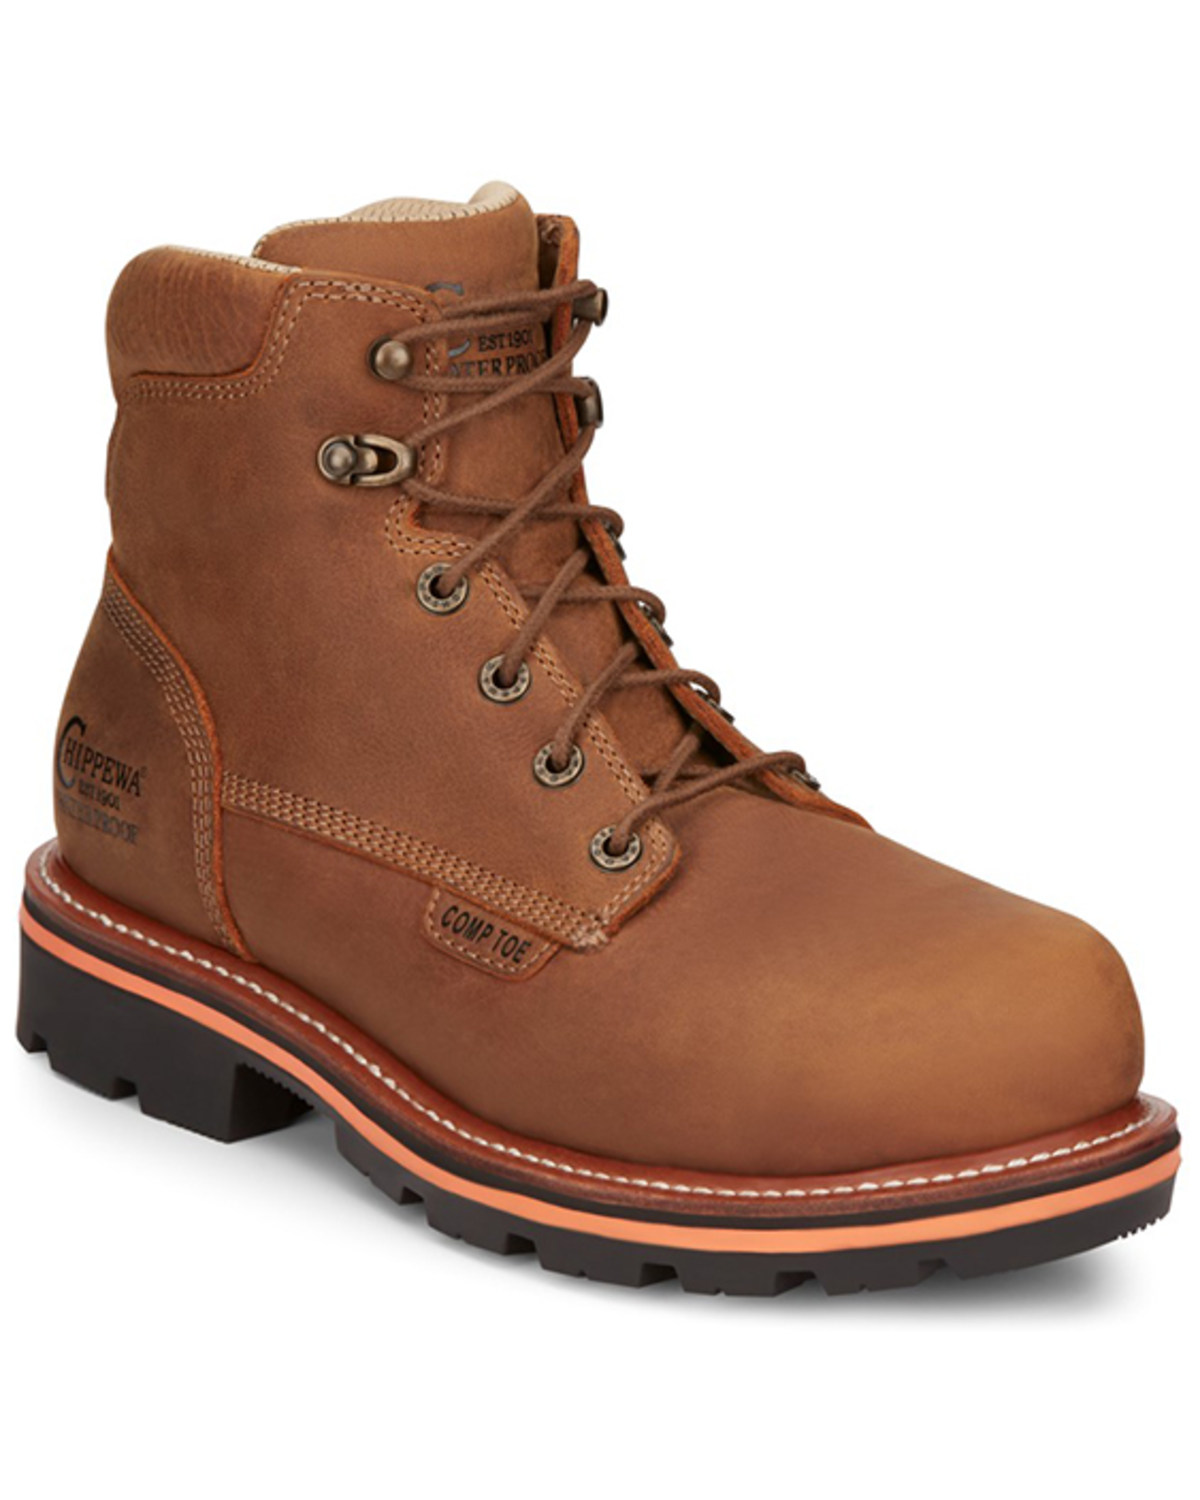 Chippewa Men's Thunderstruck Blonde 6" Lace-Up Waterproof Work Boots - Composite Toe